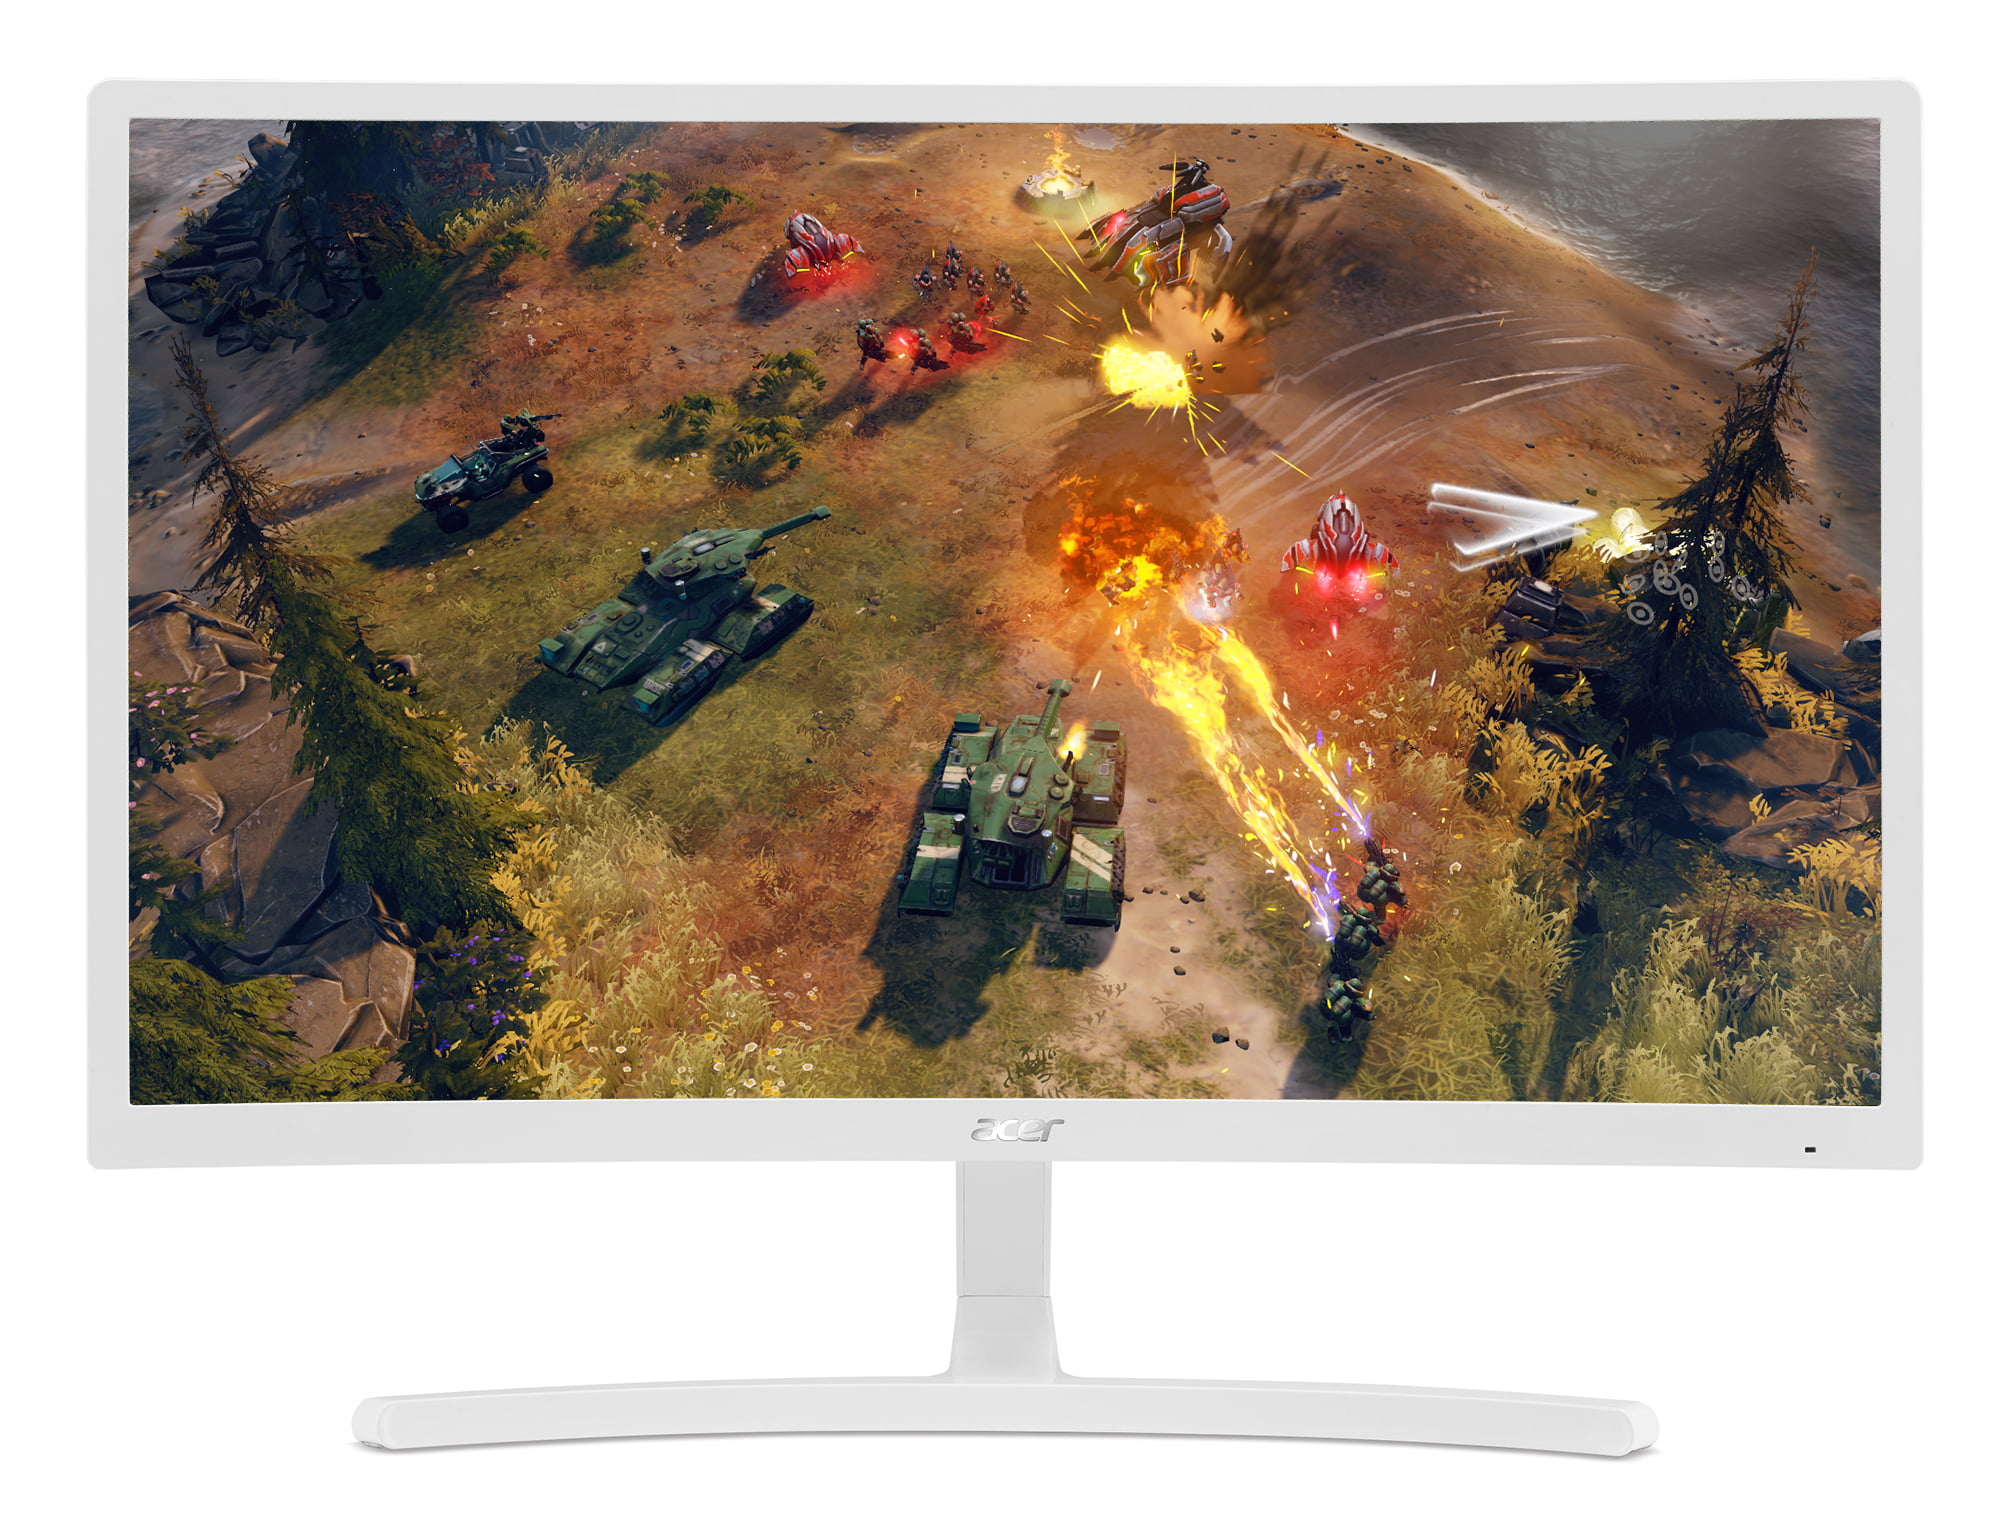 Uitrusting knelpunt verpleegster Acer ED242QR wi 24-inch Class Curved Full HD (1920 x 1080) Monitor with AMD  FREESYNC Technology (HDMI & VGA Ports) - Walmart.com